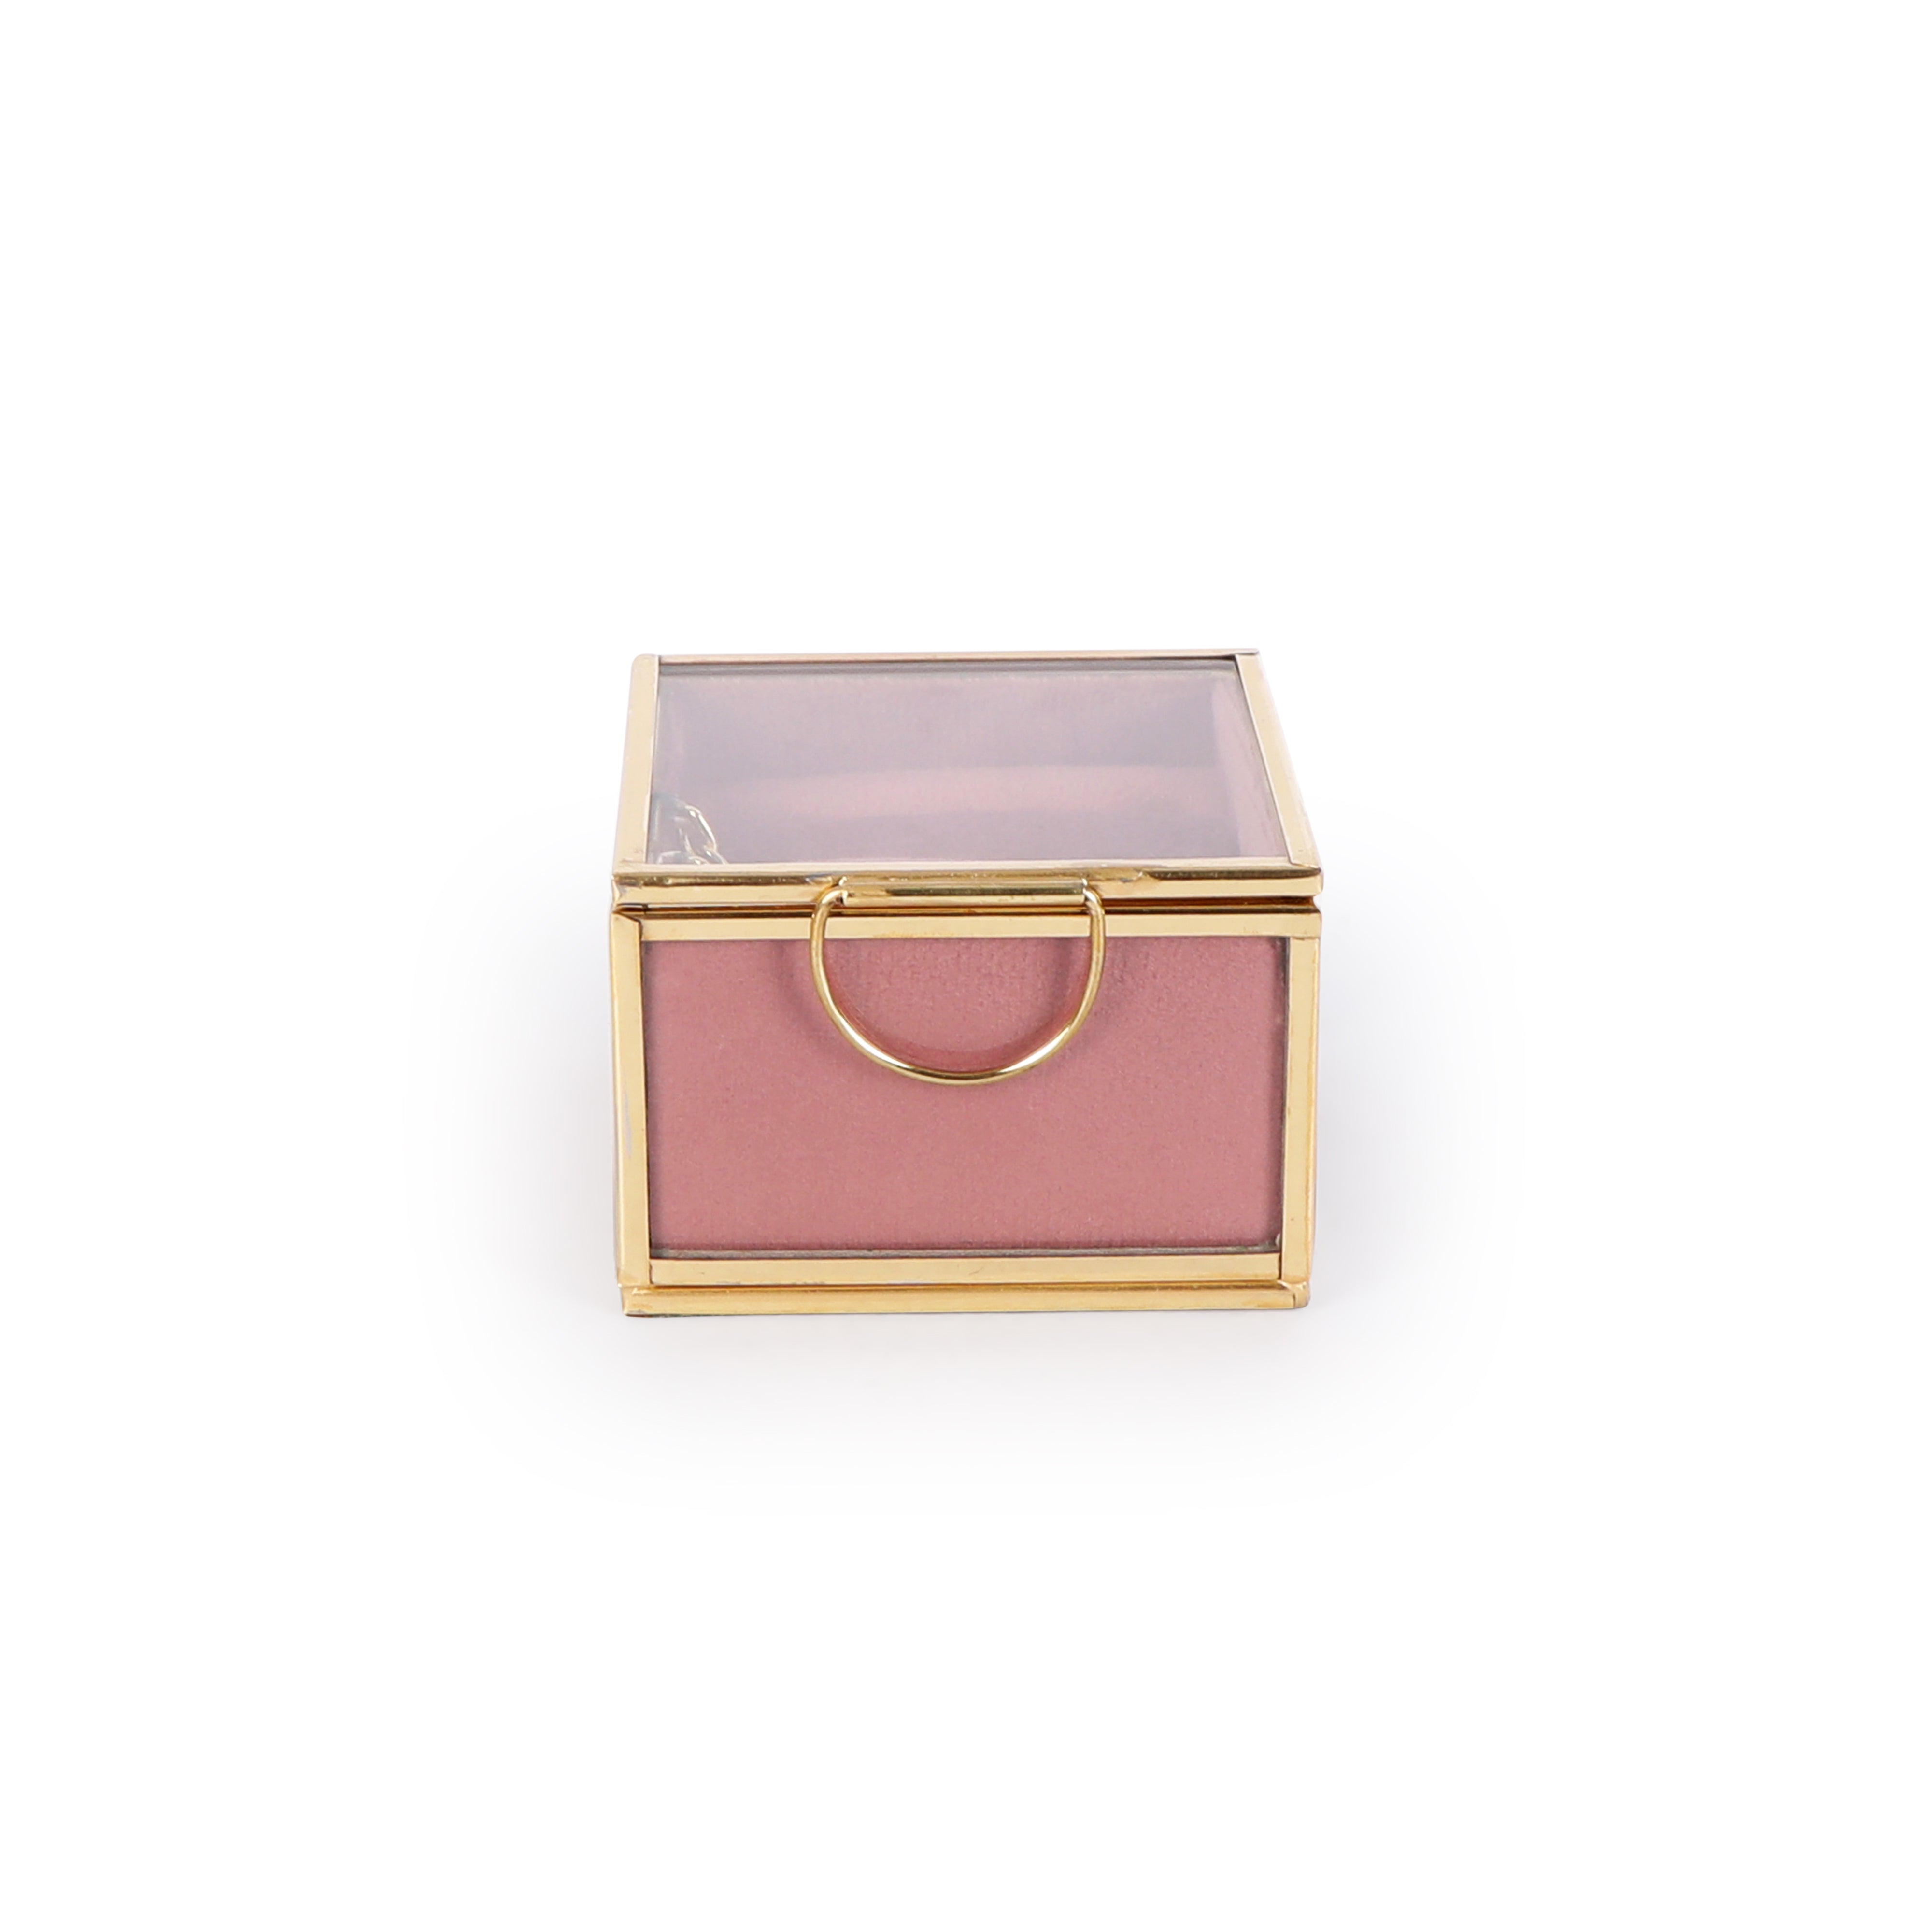 Glass Ring Box - Pink Ring Case 3- The Home Co.